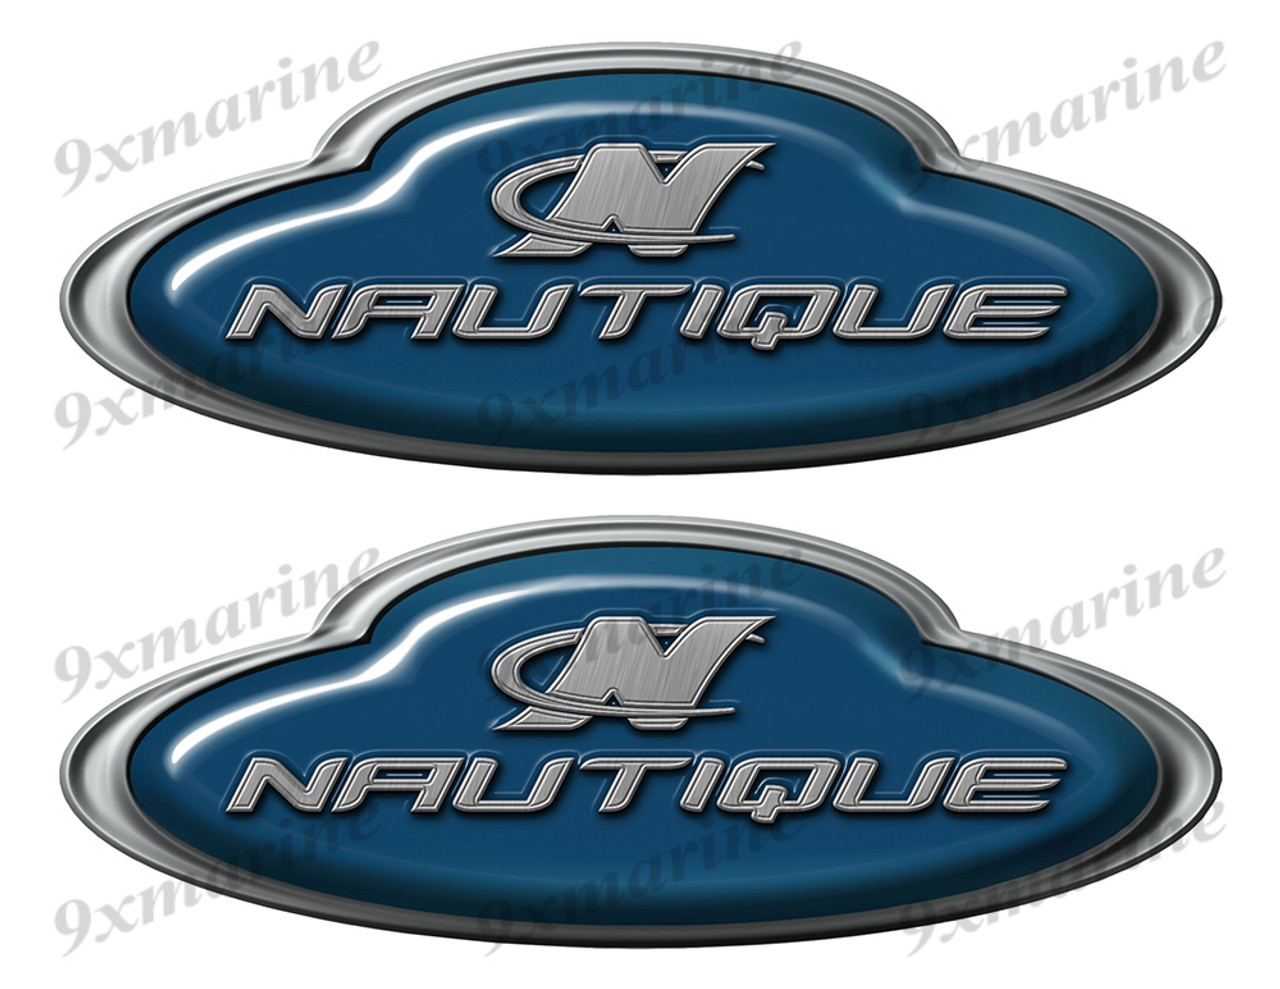 Correct Craft Nautique Boat Oval Sticker set - Name Plate